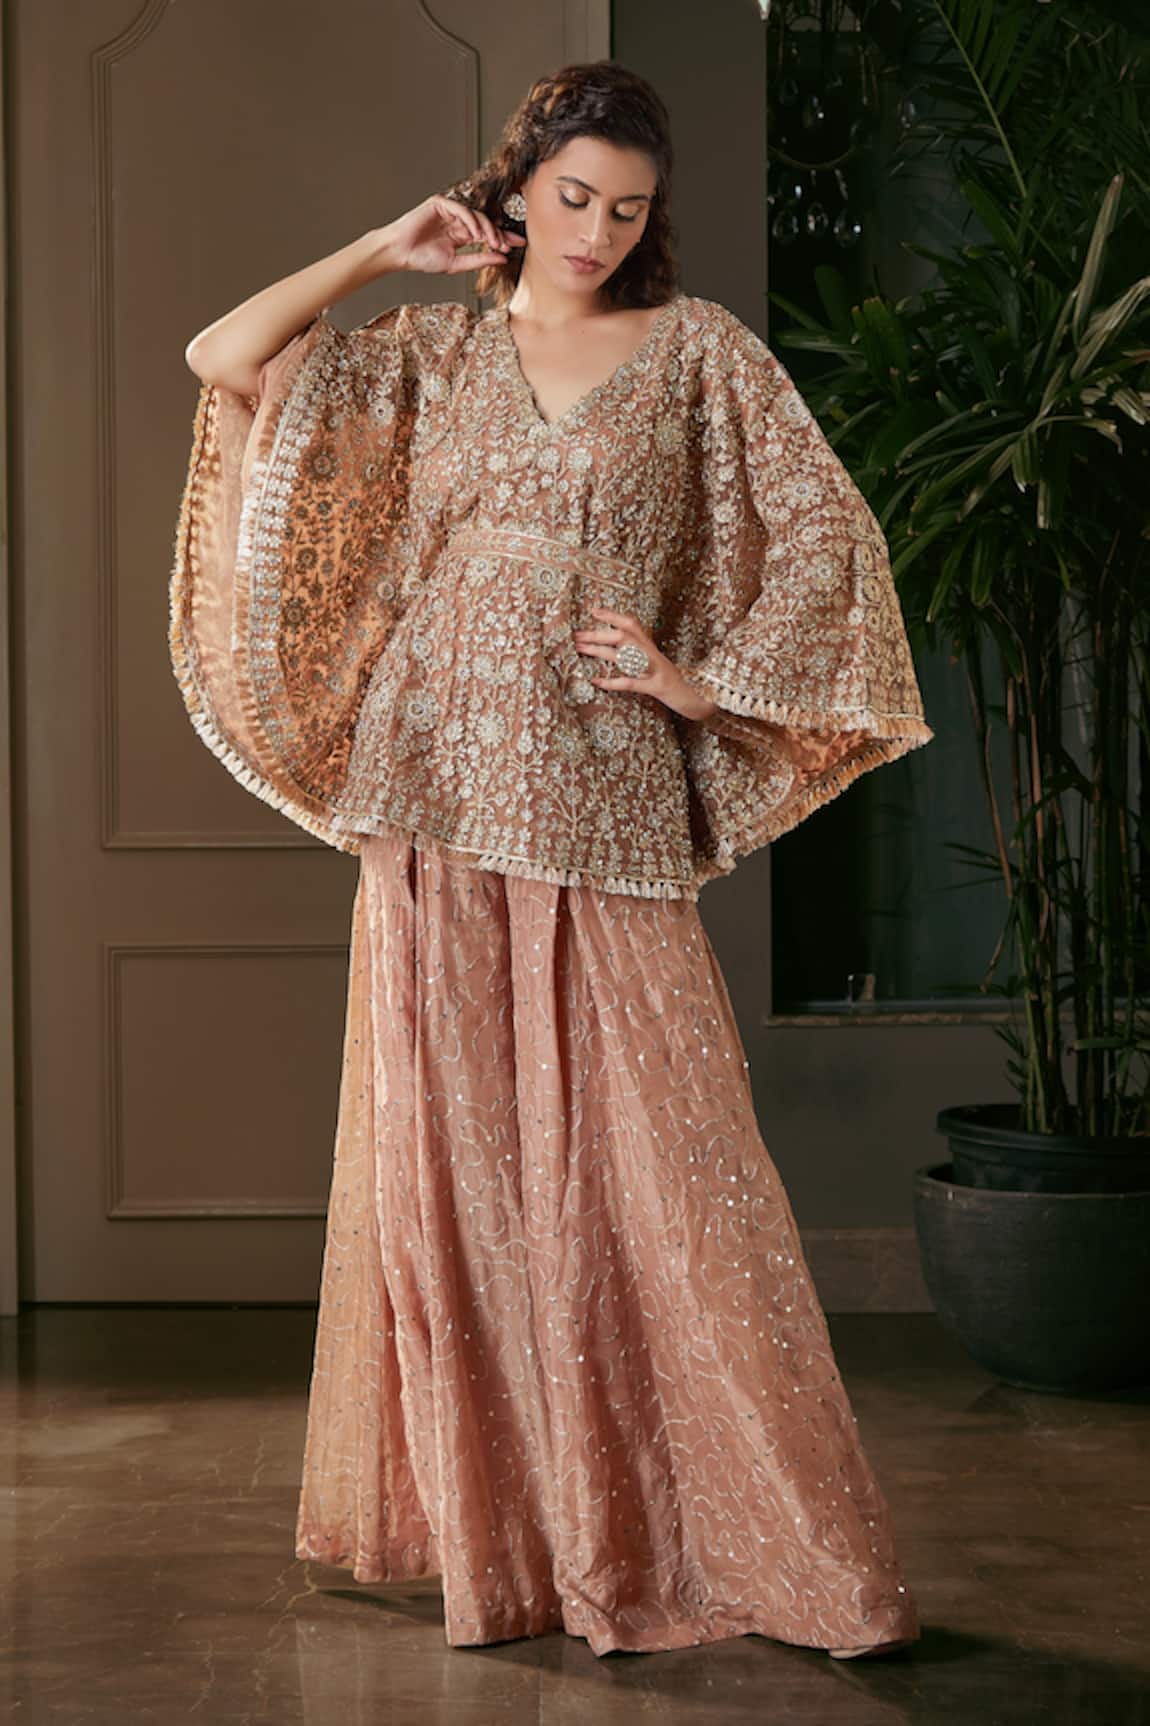 Kisneel by Pam Embroidered Cape & Pant Set